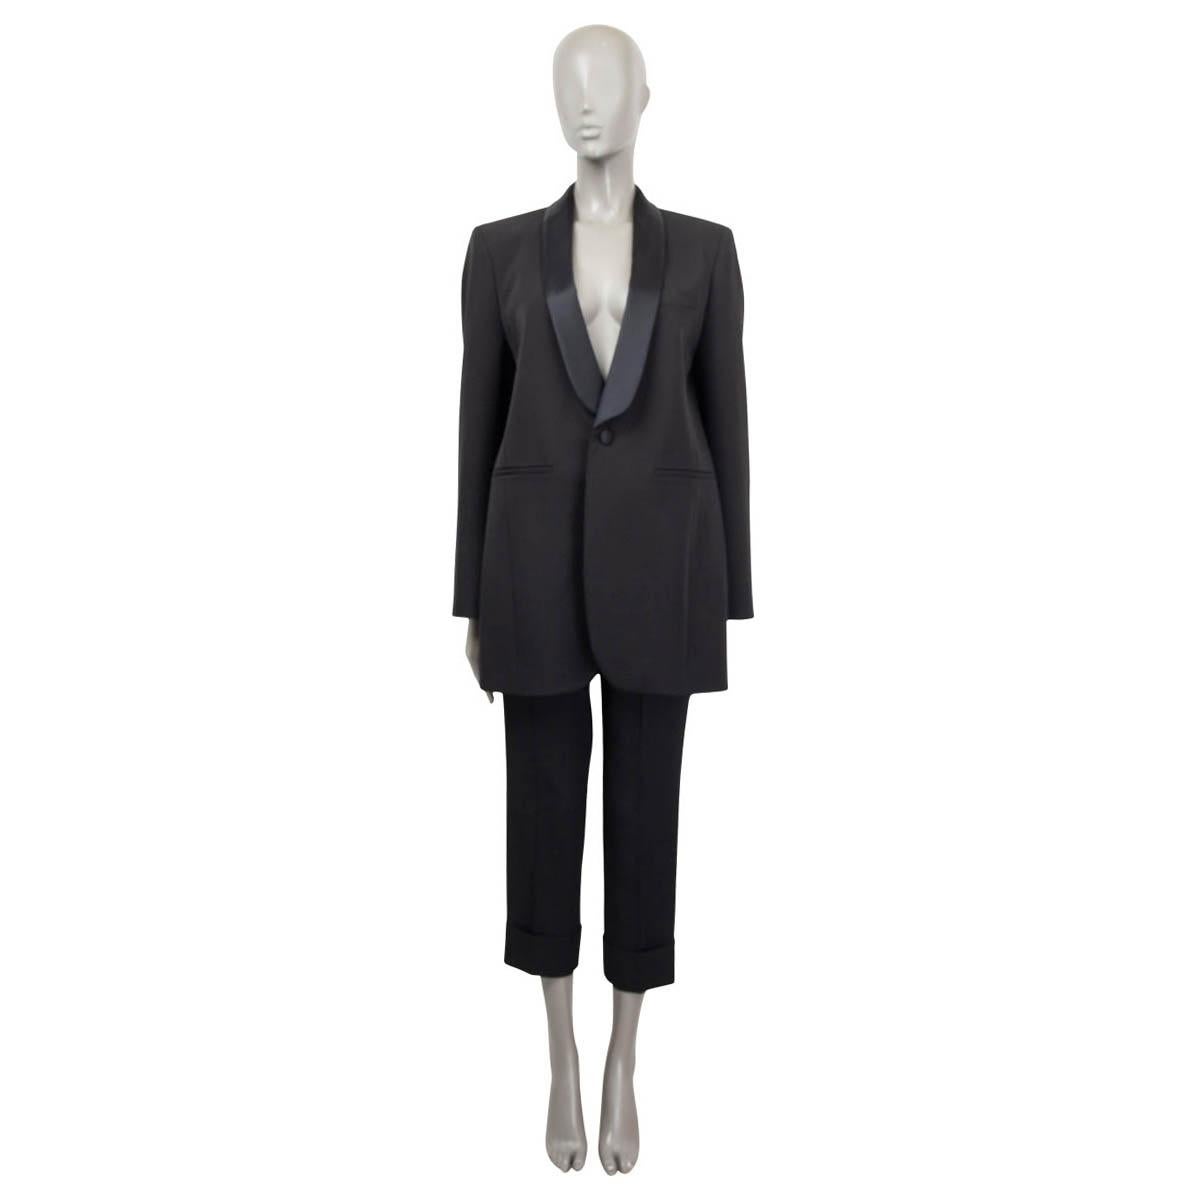 100% authentic Balenciaga oversized blazer in black wool (100%). Lined in black silk (100%). Features a shiny shawl-collar in black silk (100%), two slit pockets in the front and opens with one black silk button in the front. Has been worn and shows